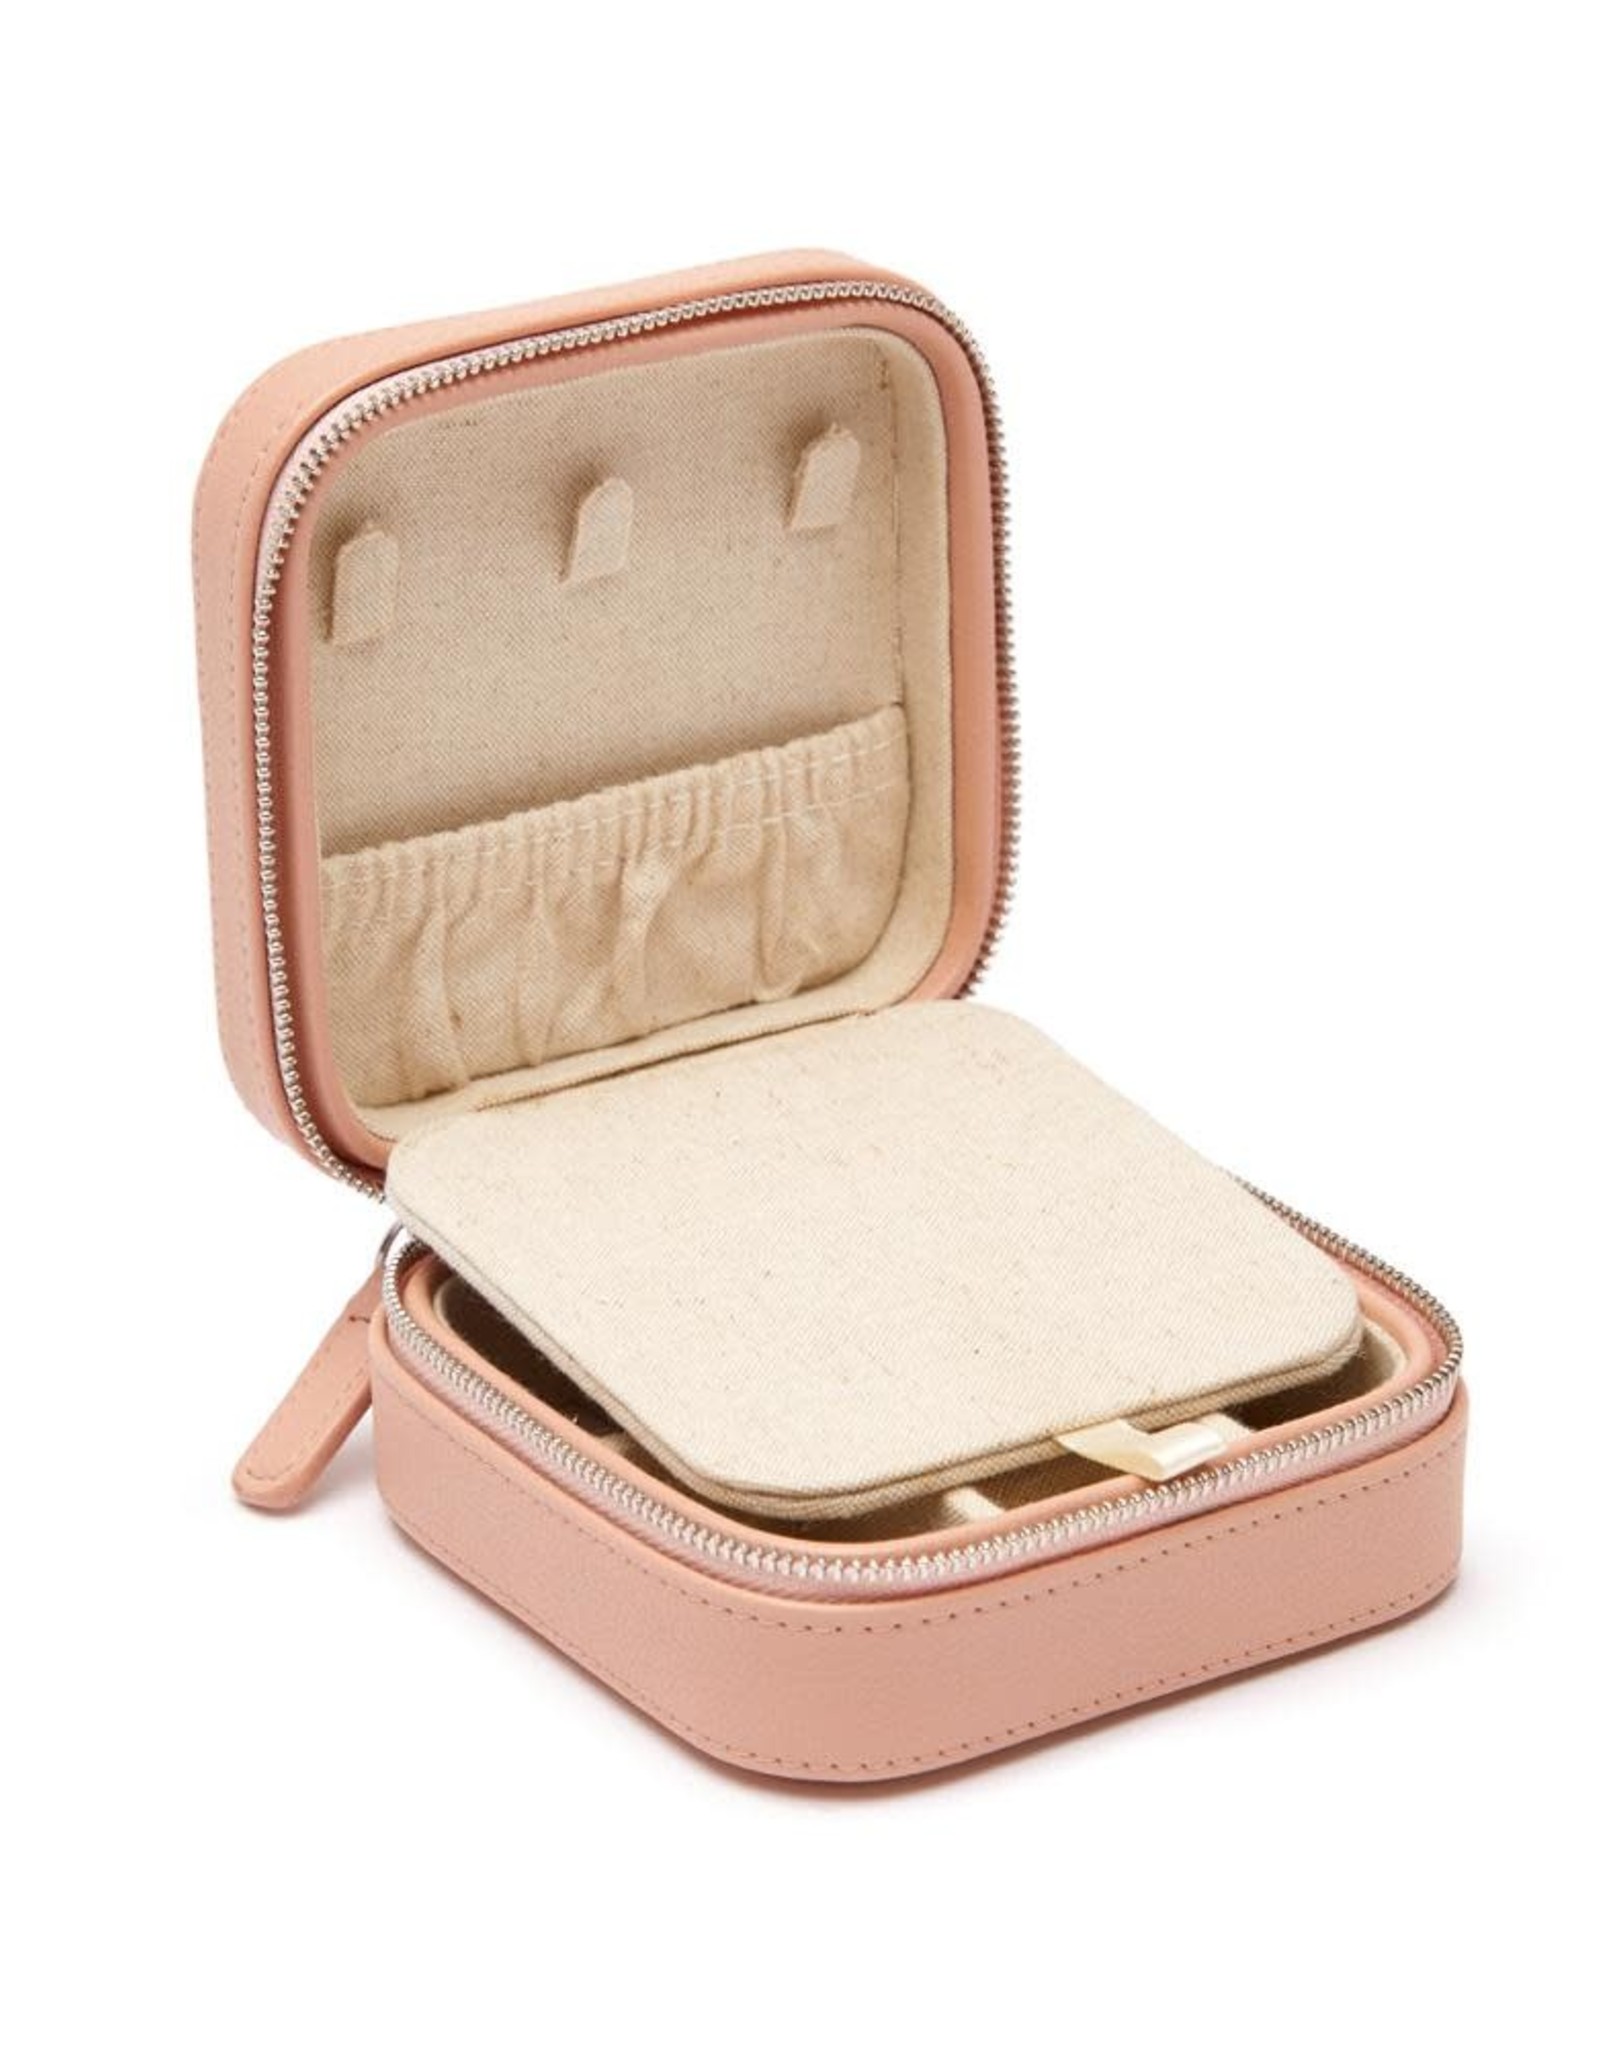 Brouk and Co. Luna Small Travel Jewelry Case